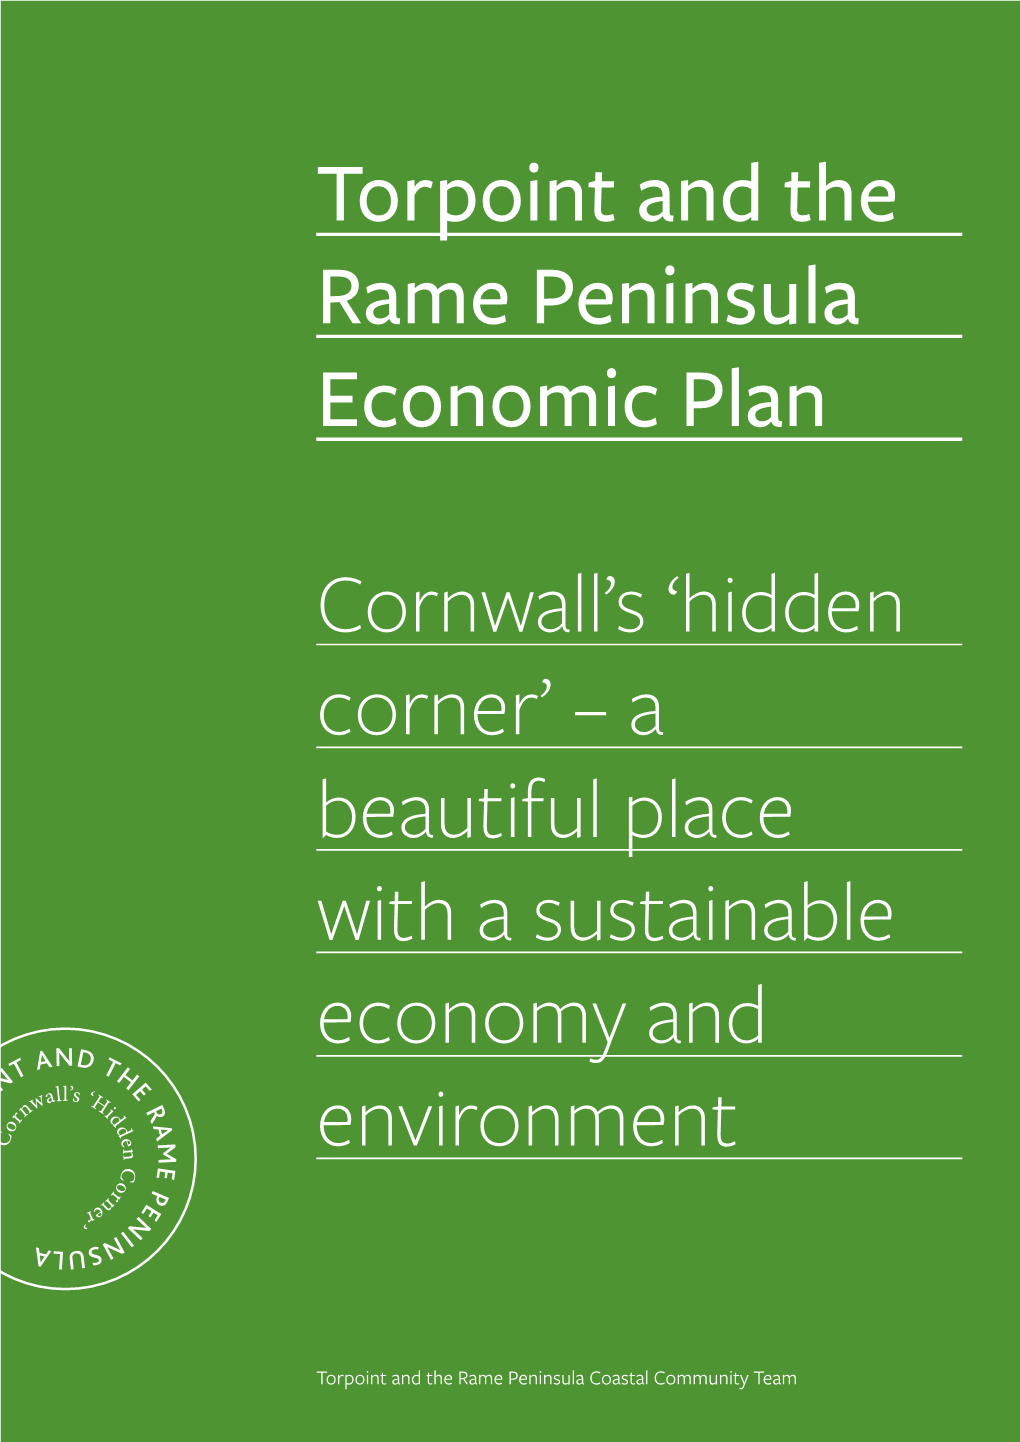 Torpoint and the Rame Peninsula Economic Plan